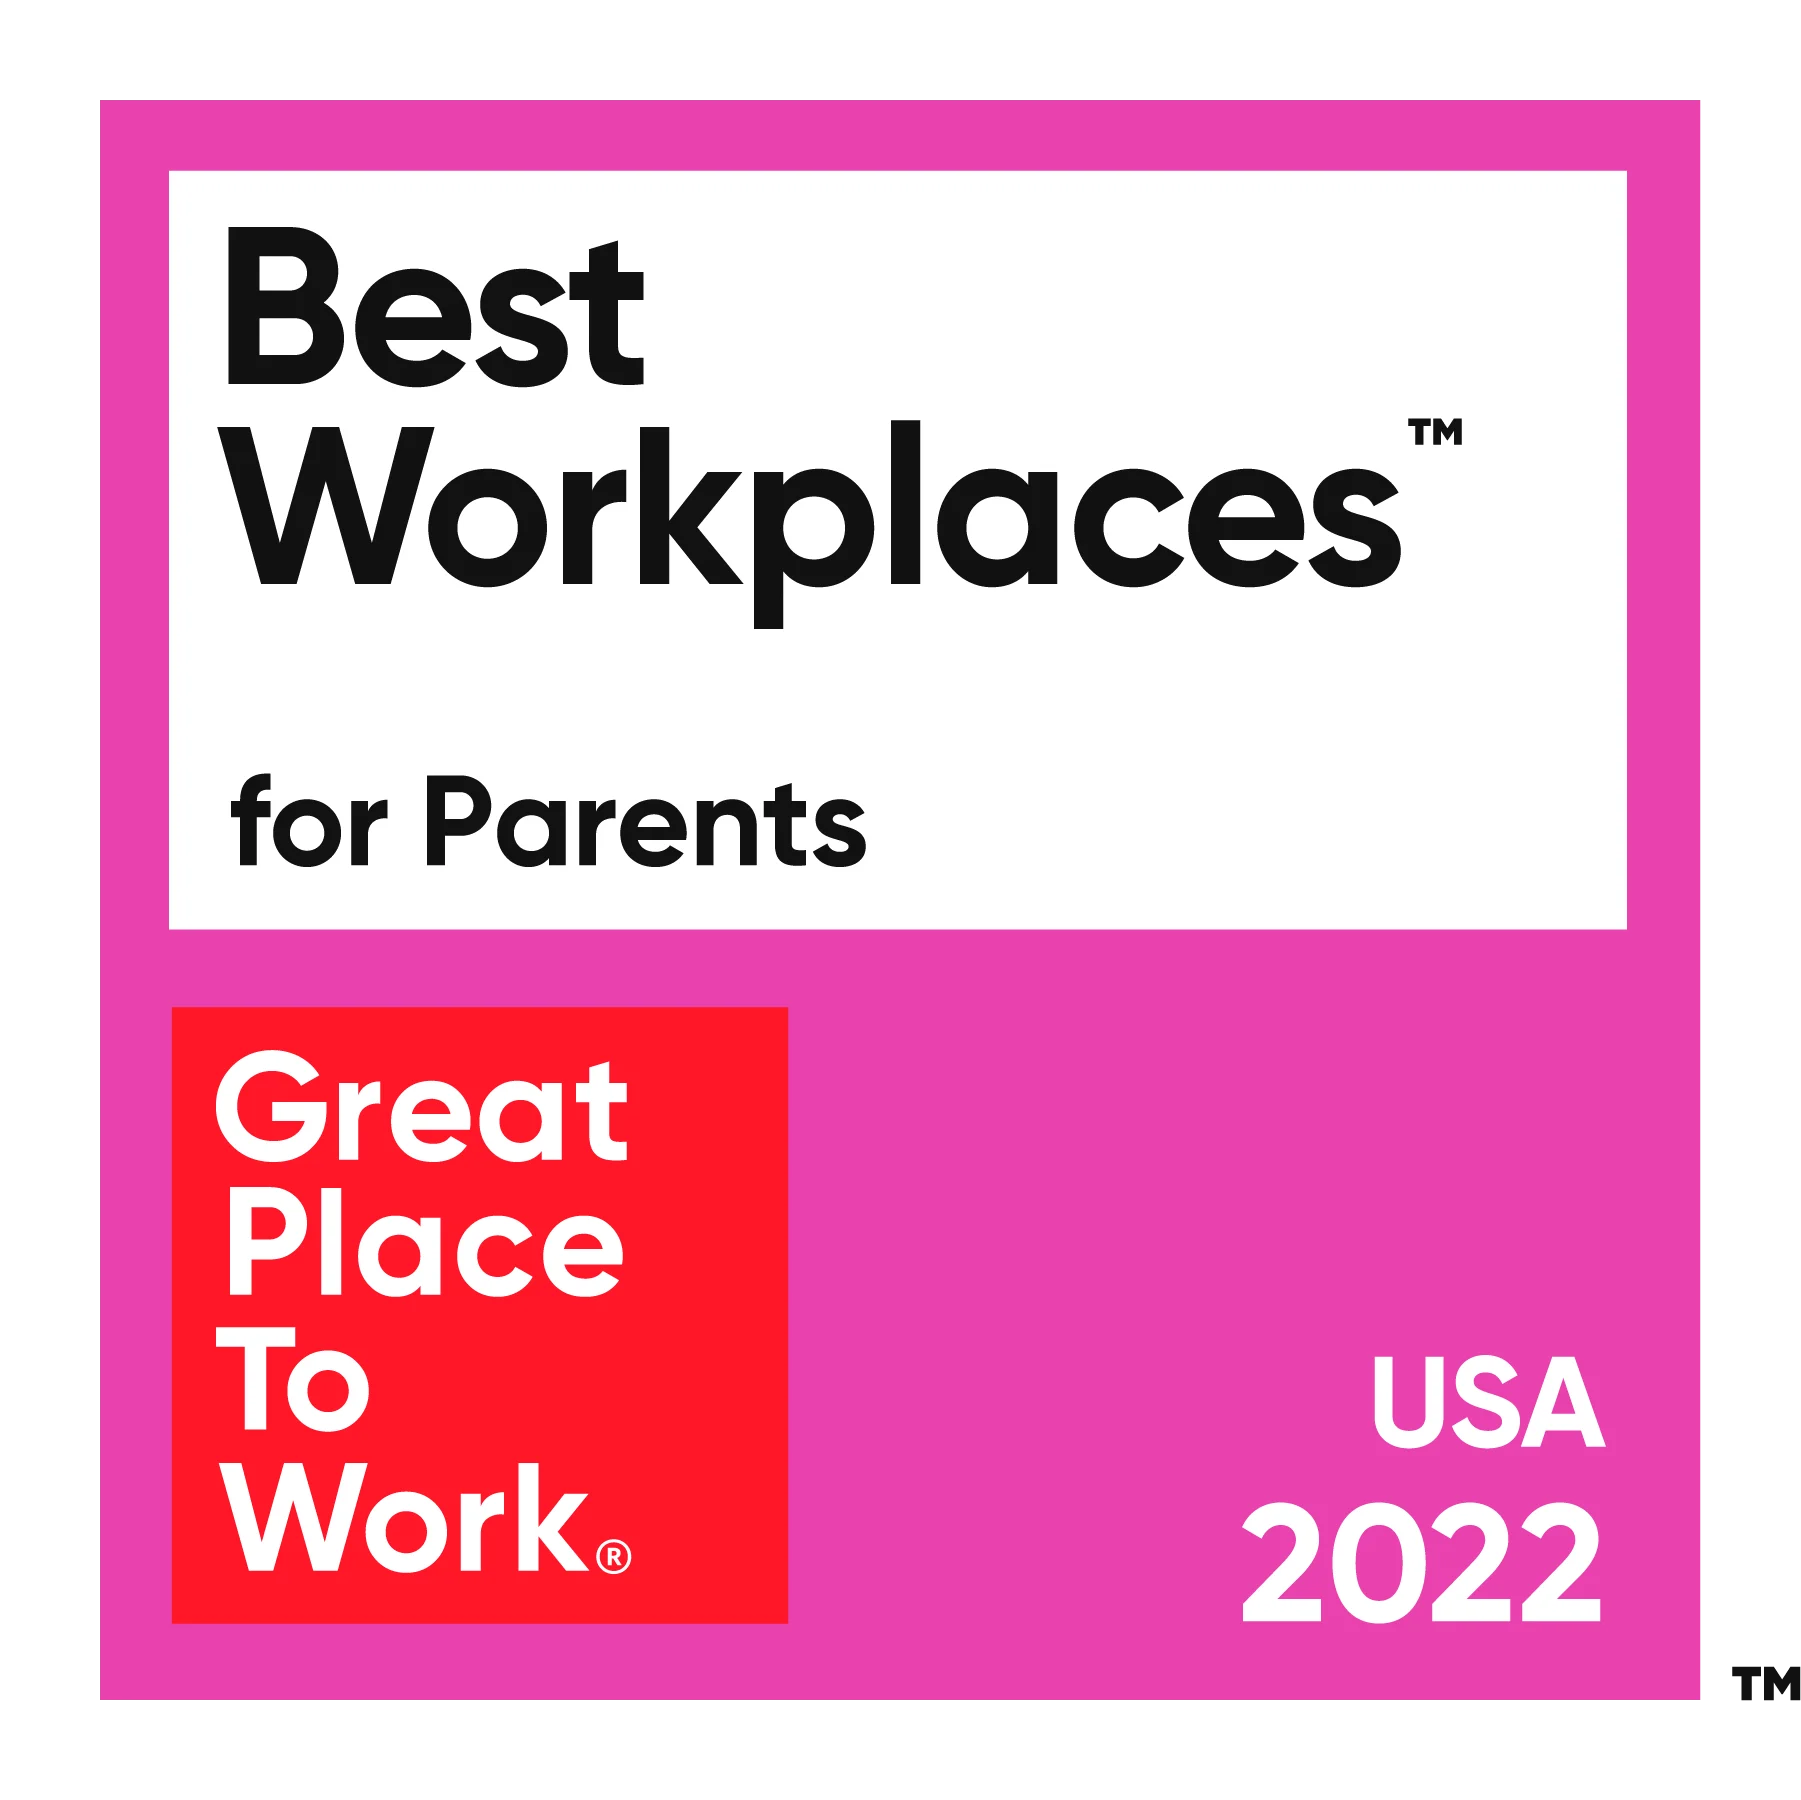 West Monroe again is named to 100 Best Companies to Work For in 2022 by  Fortune and Great Place to Work®